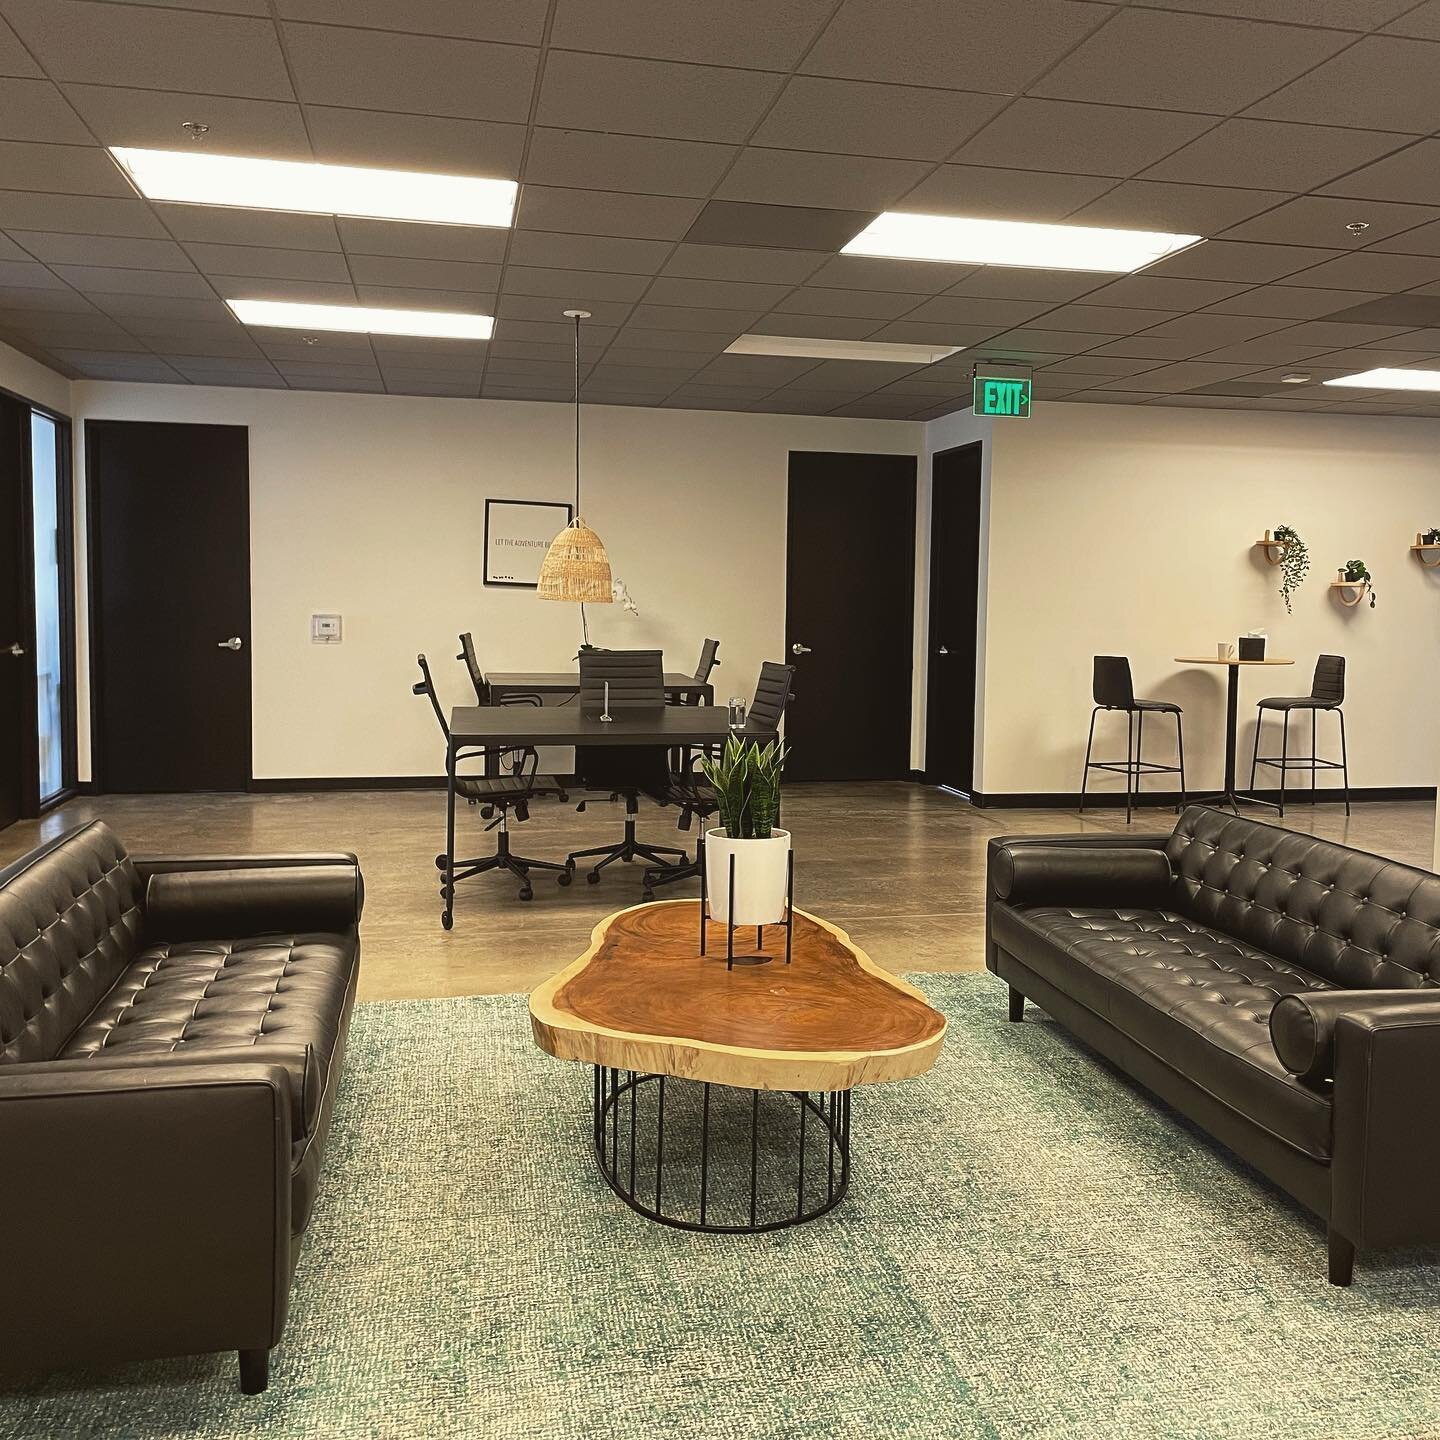 Do you enjoy working in an open, welcoming environment? Well, the Coworking areas at WorkSpace Carlsbad would be perfect for you! This all-inclusive membership encourages networking while still maintaining a productive atmosphere. DM us for more deta